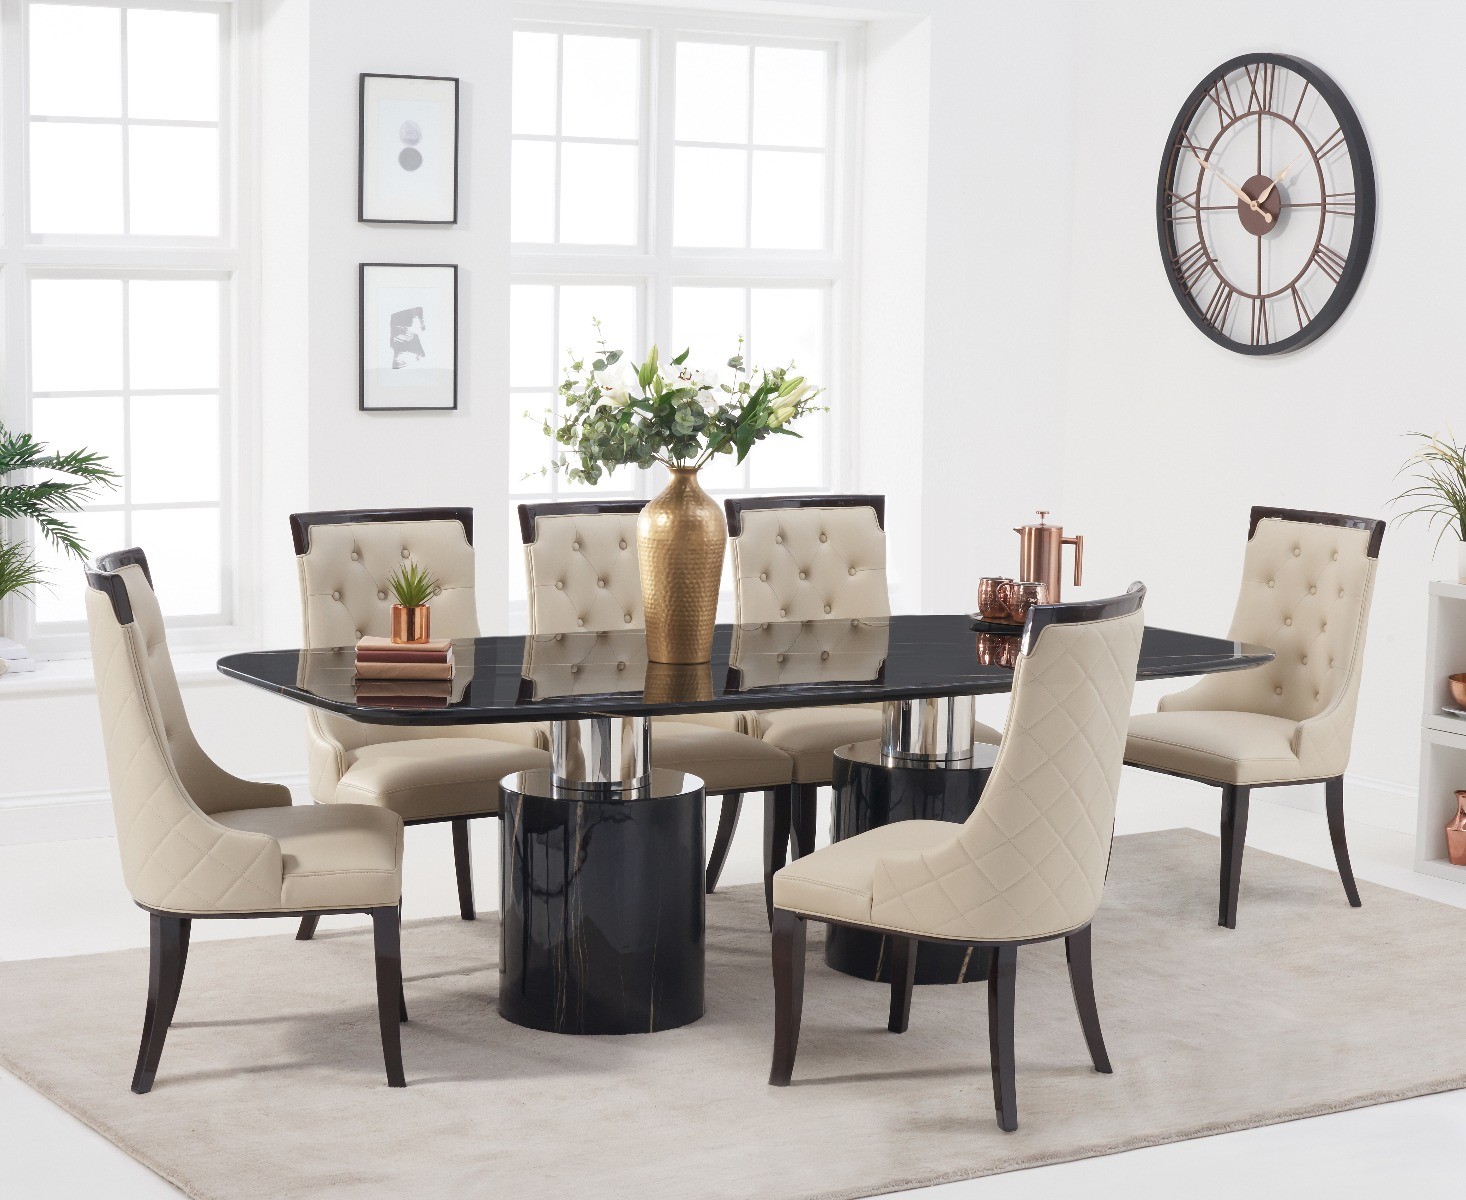 Antonio 180cm Black Marble Dining Table With 8 Cream Francesca Chairs